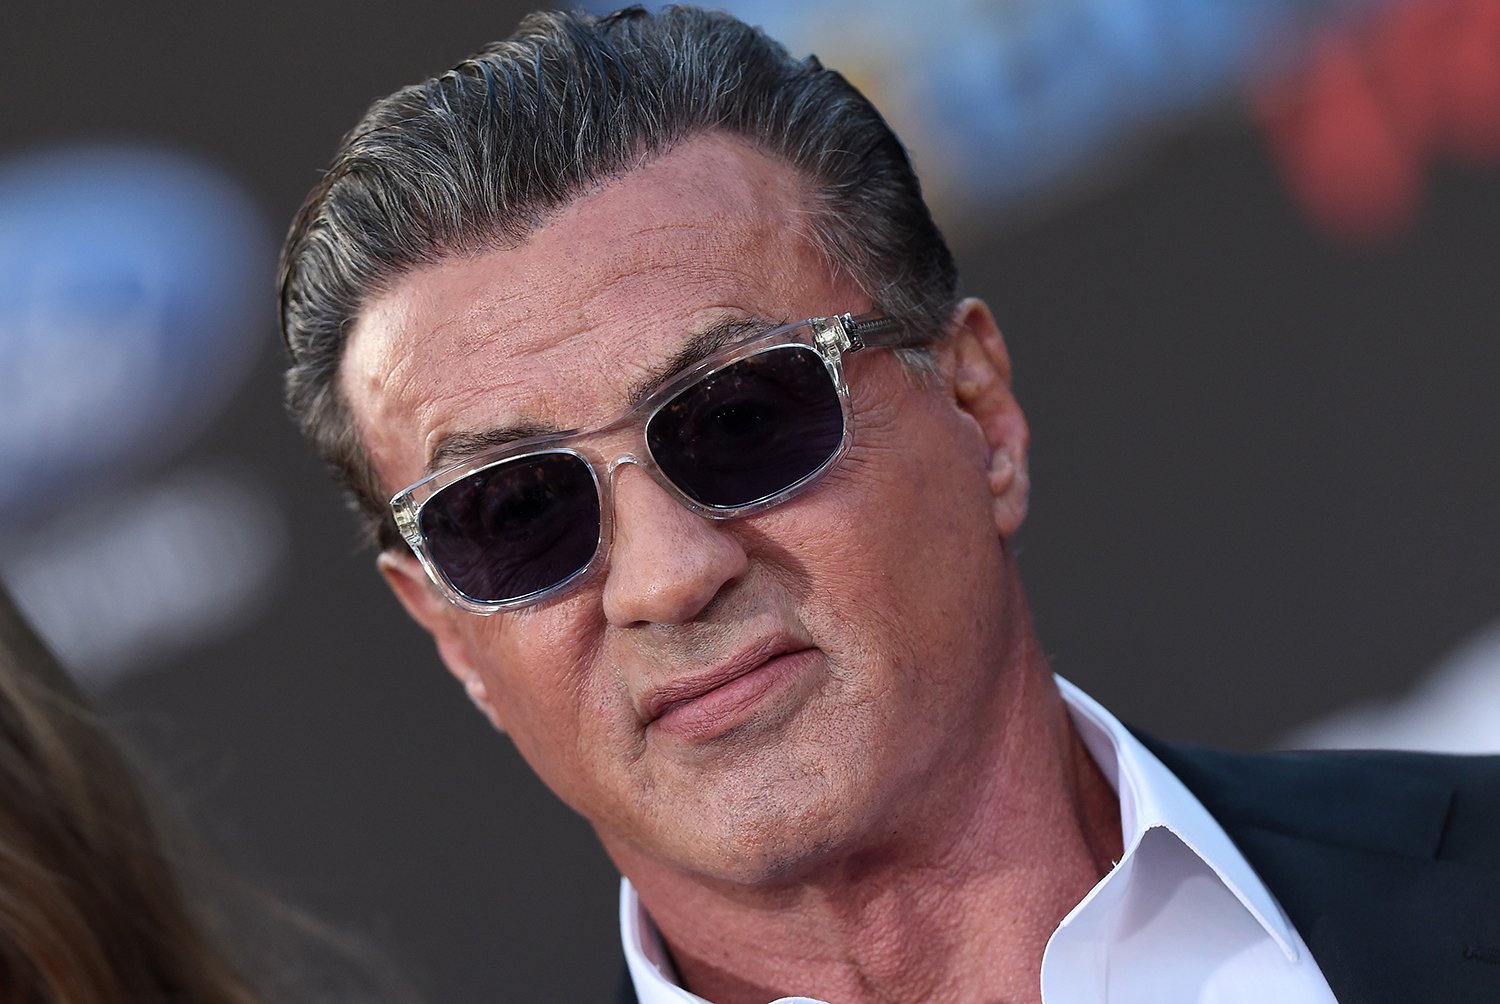 Sylvester Stallone at the Guardians of the Galaxy 2 premiere